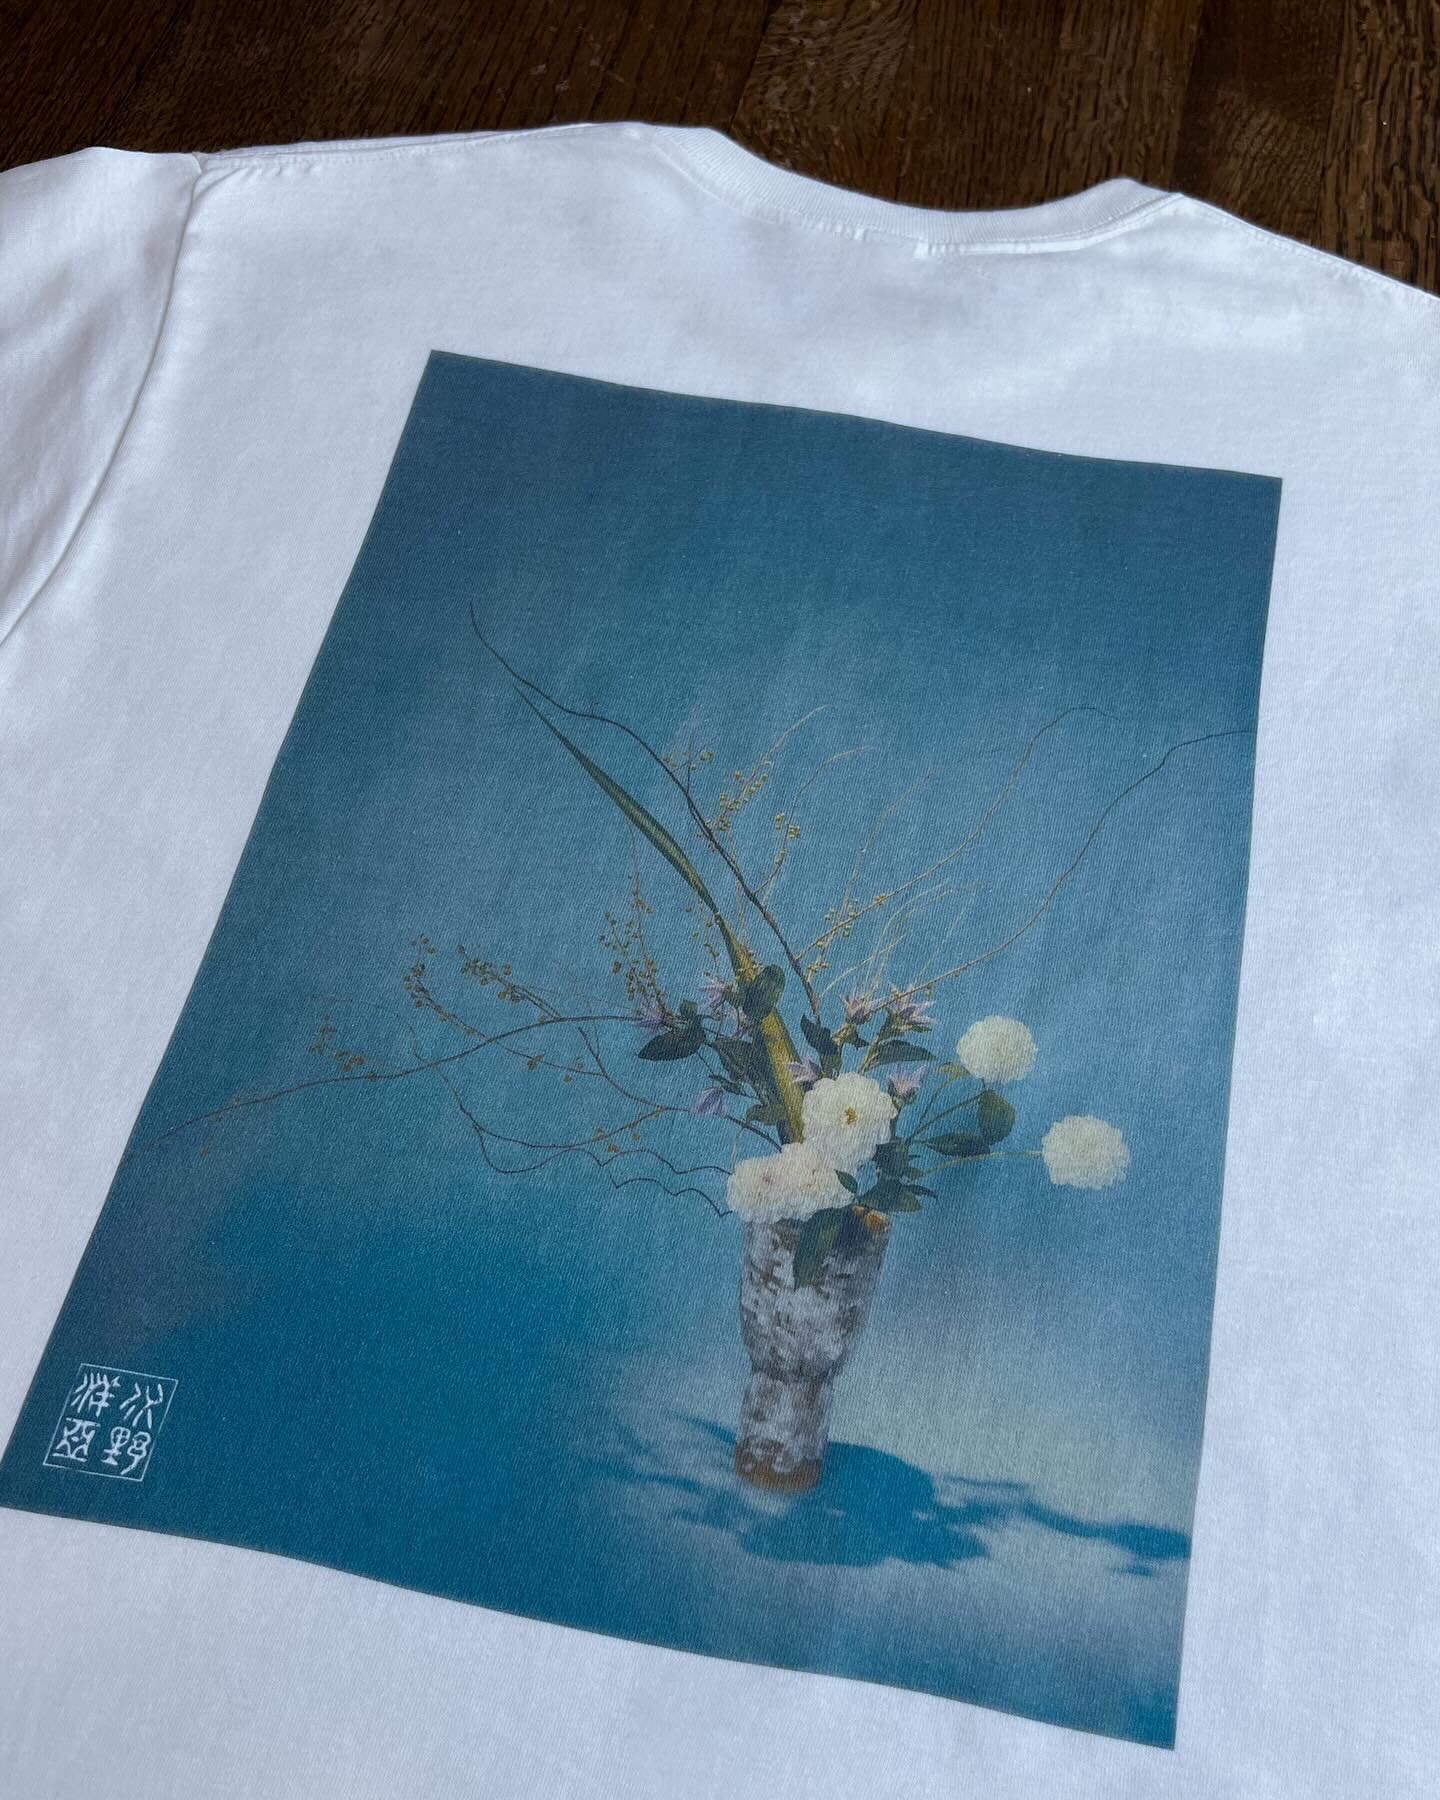 Yoa Ikebana&rsquo;s first original T-shirts and Hoodies (only Small Hoodies in stock) are available on my website🩵

An Ikebana arrangement by Yoa Mizuno, photographed by @christophervonsteinbach, is printed on the back. Yoa Ikebana logo is printed o